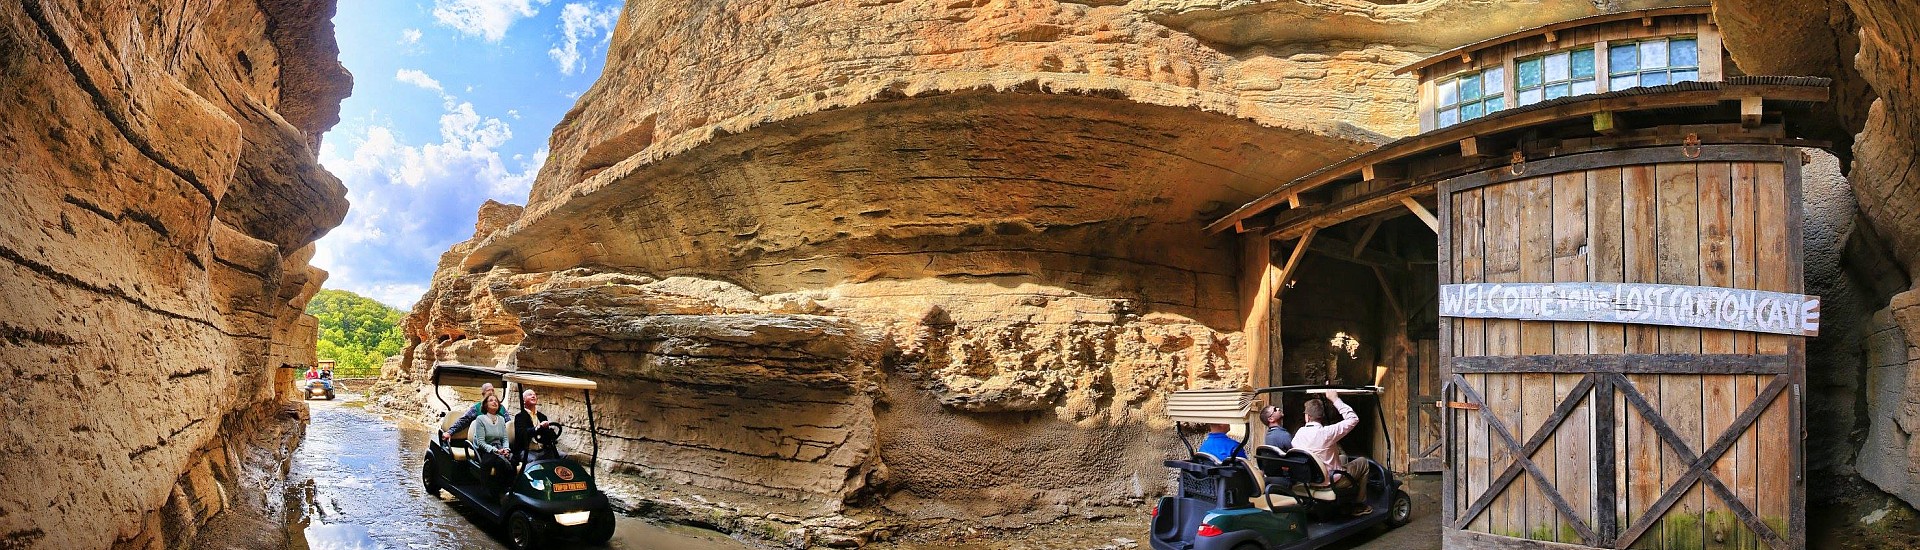 jeep cave tours in missouri